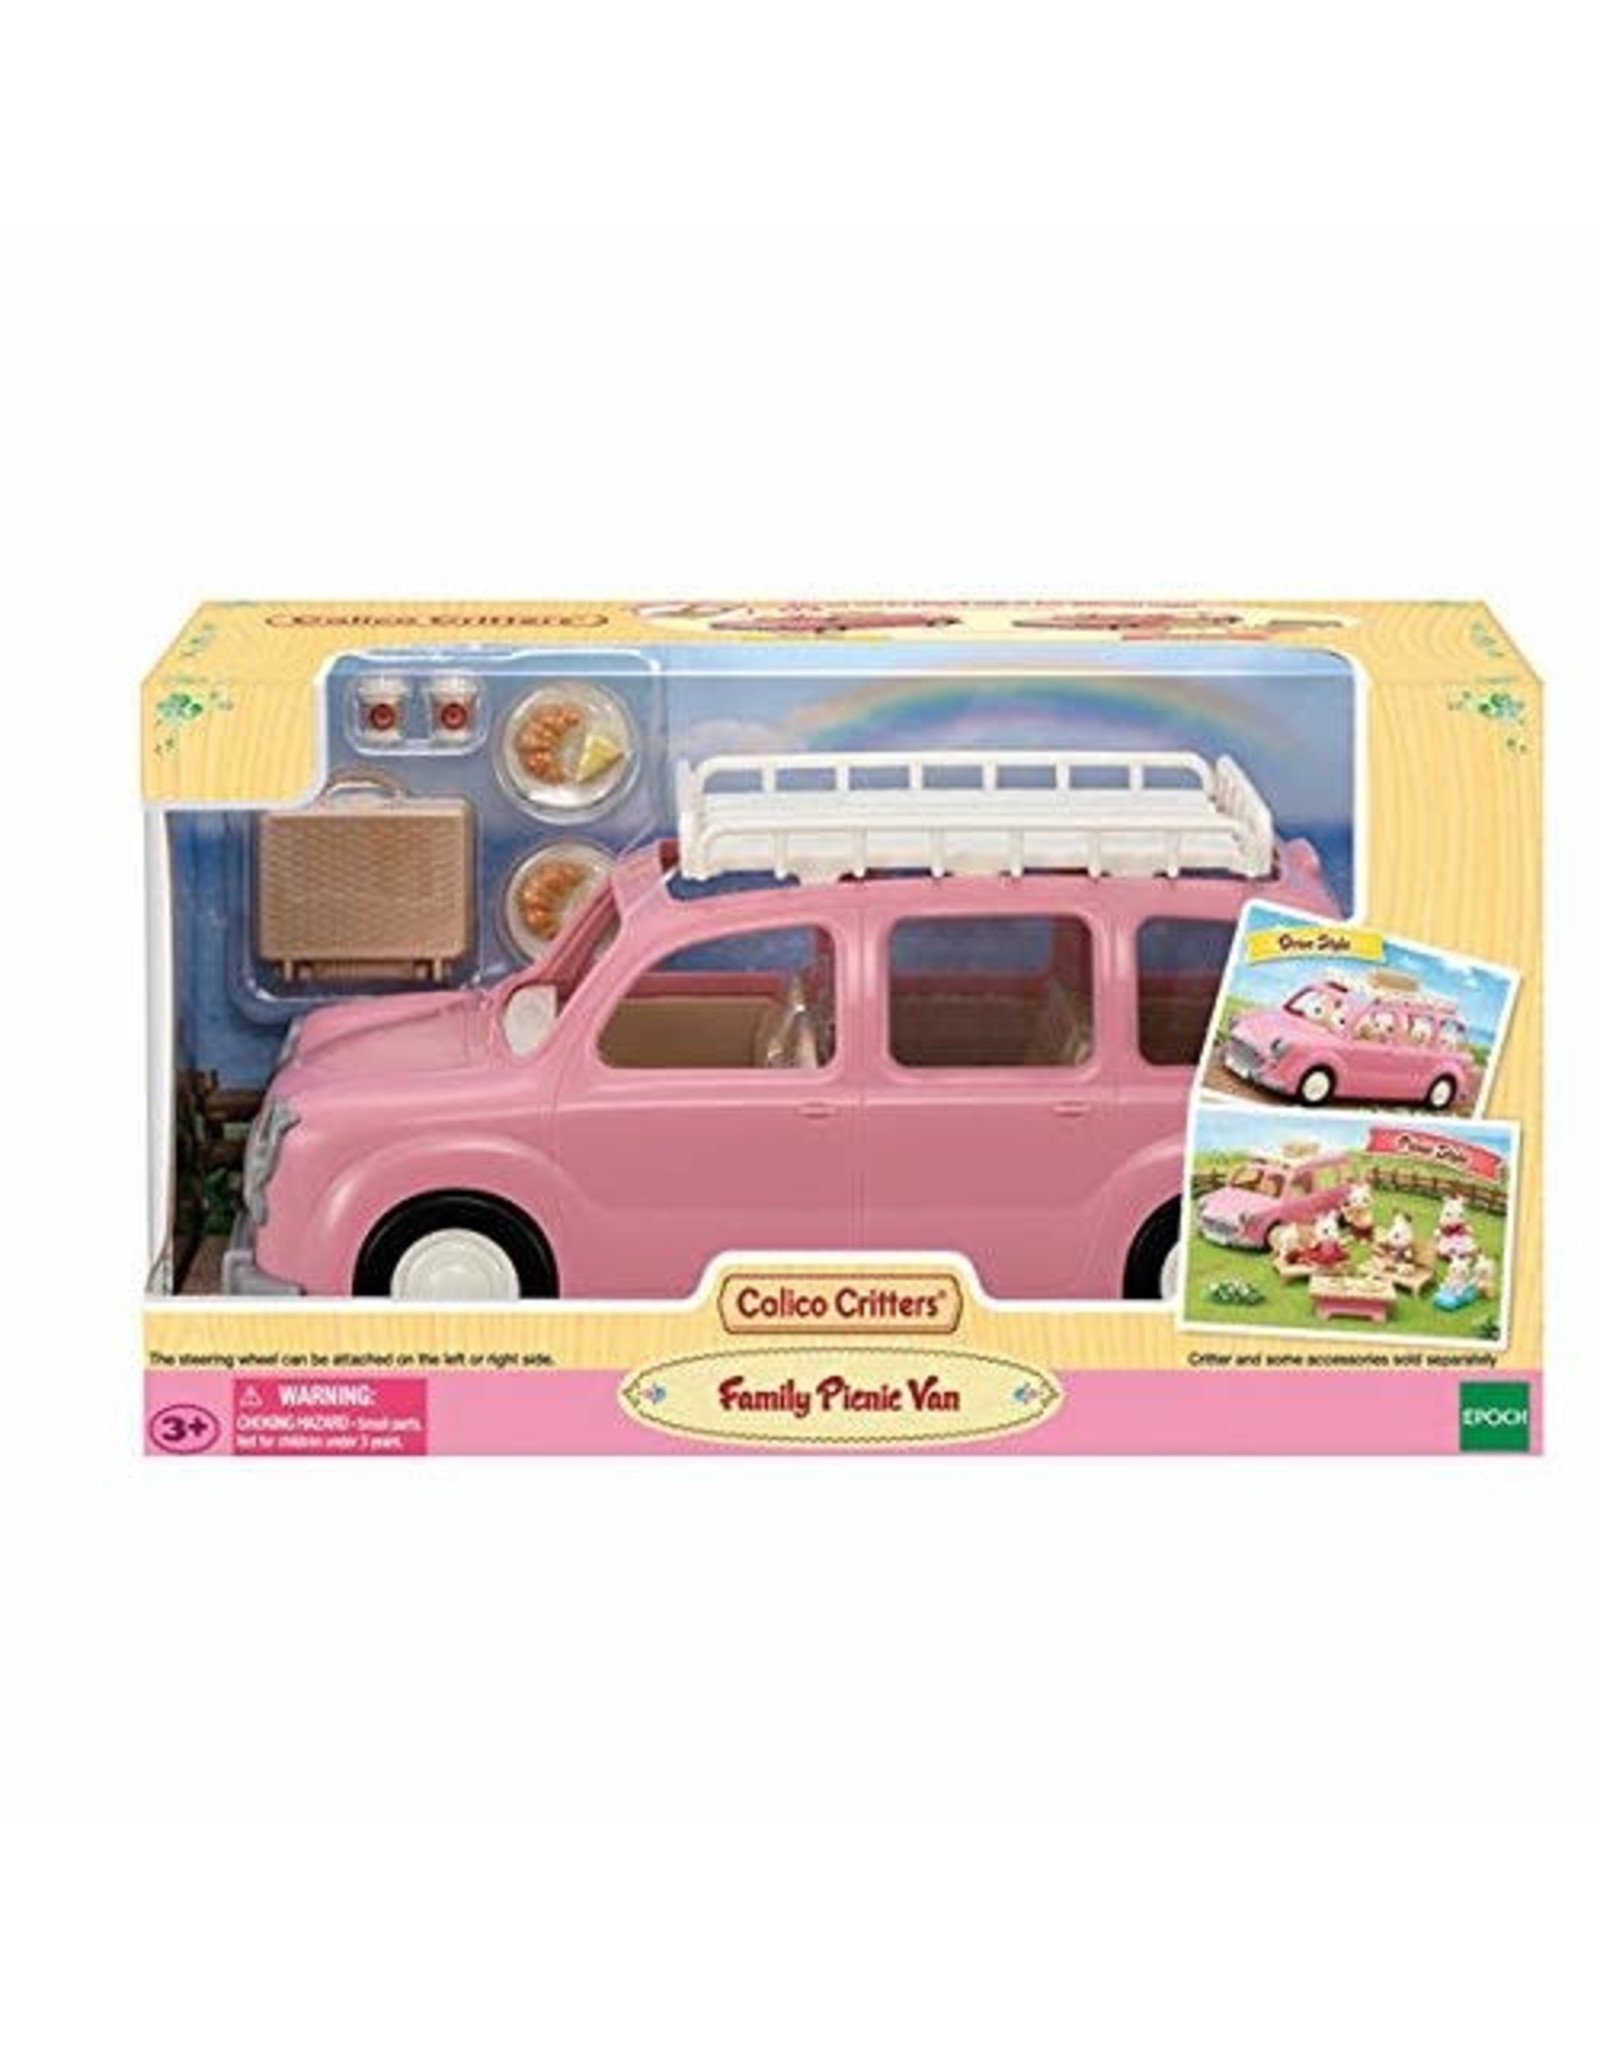 Calico Critters Calico Critters Family Picnic Van